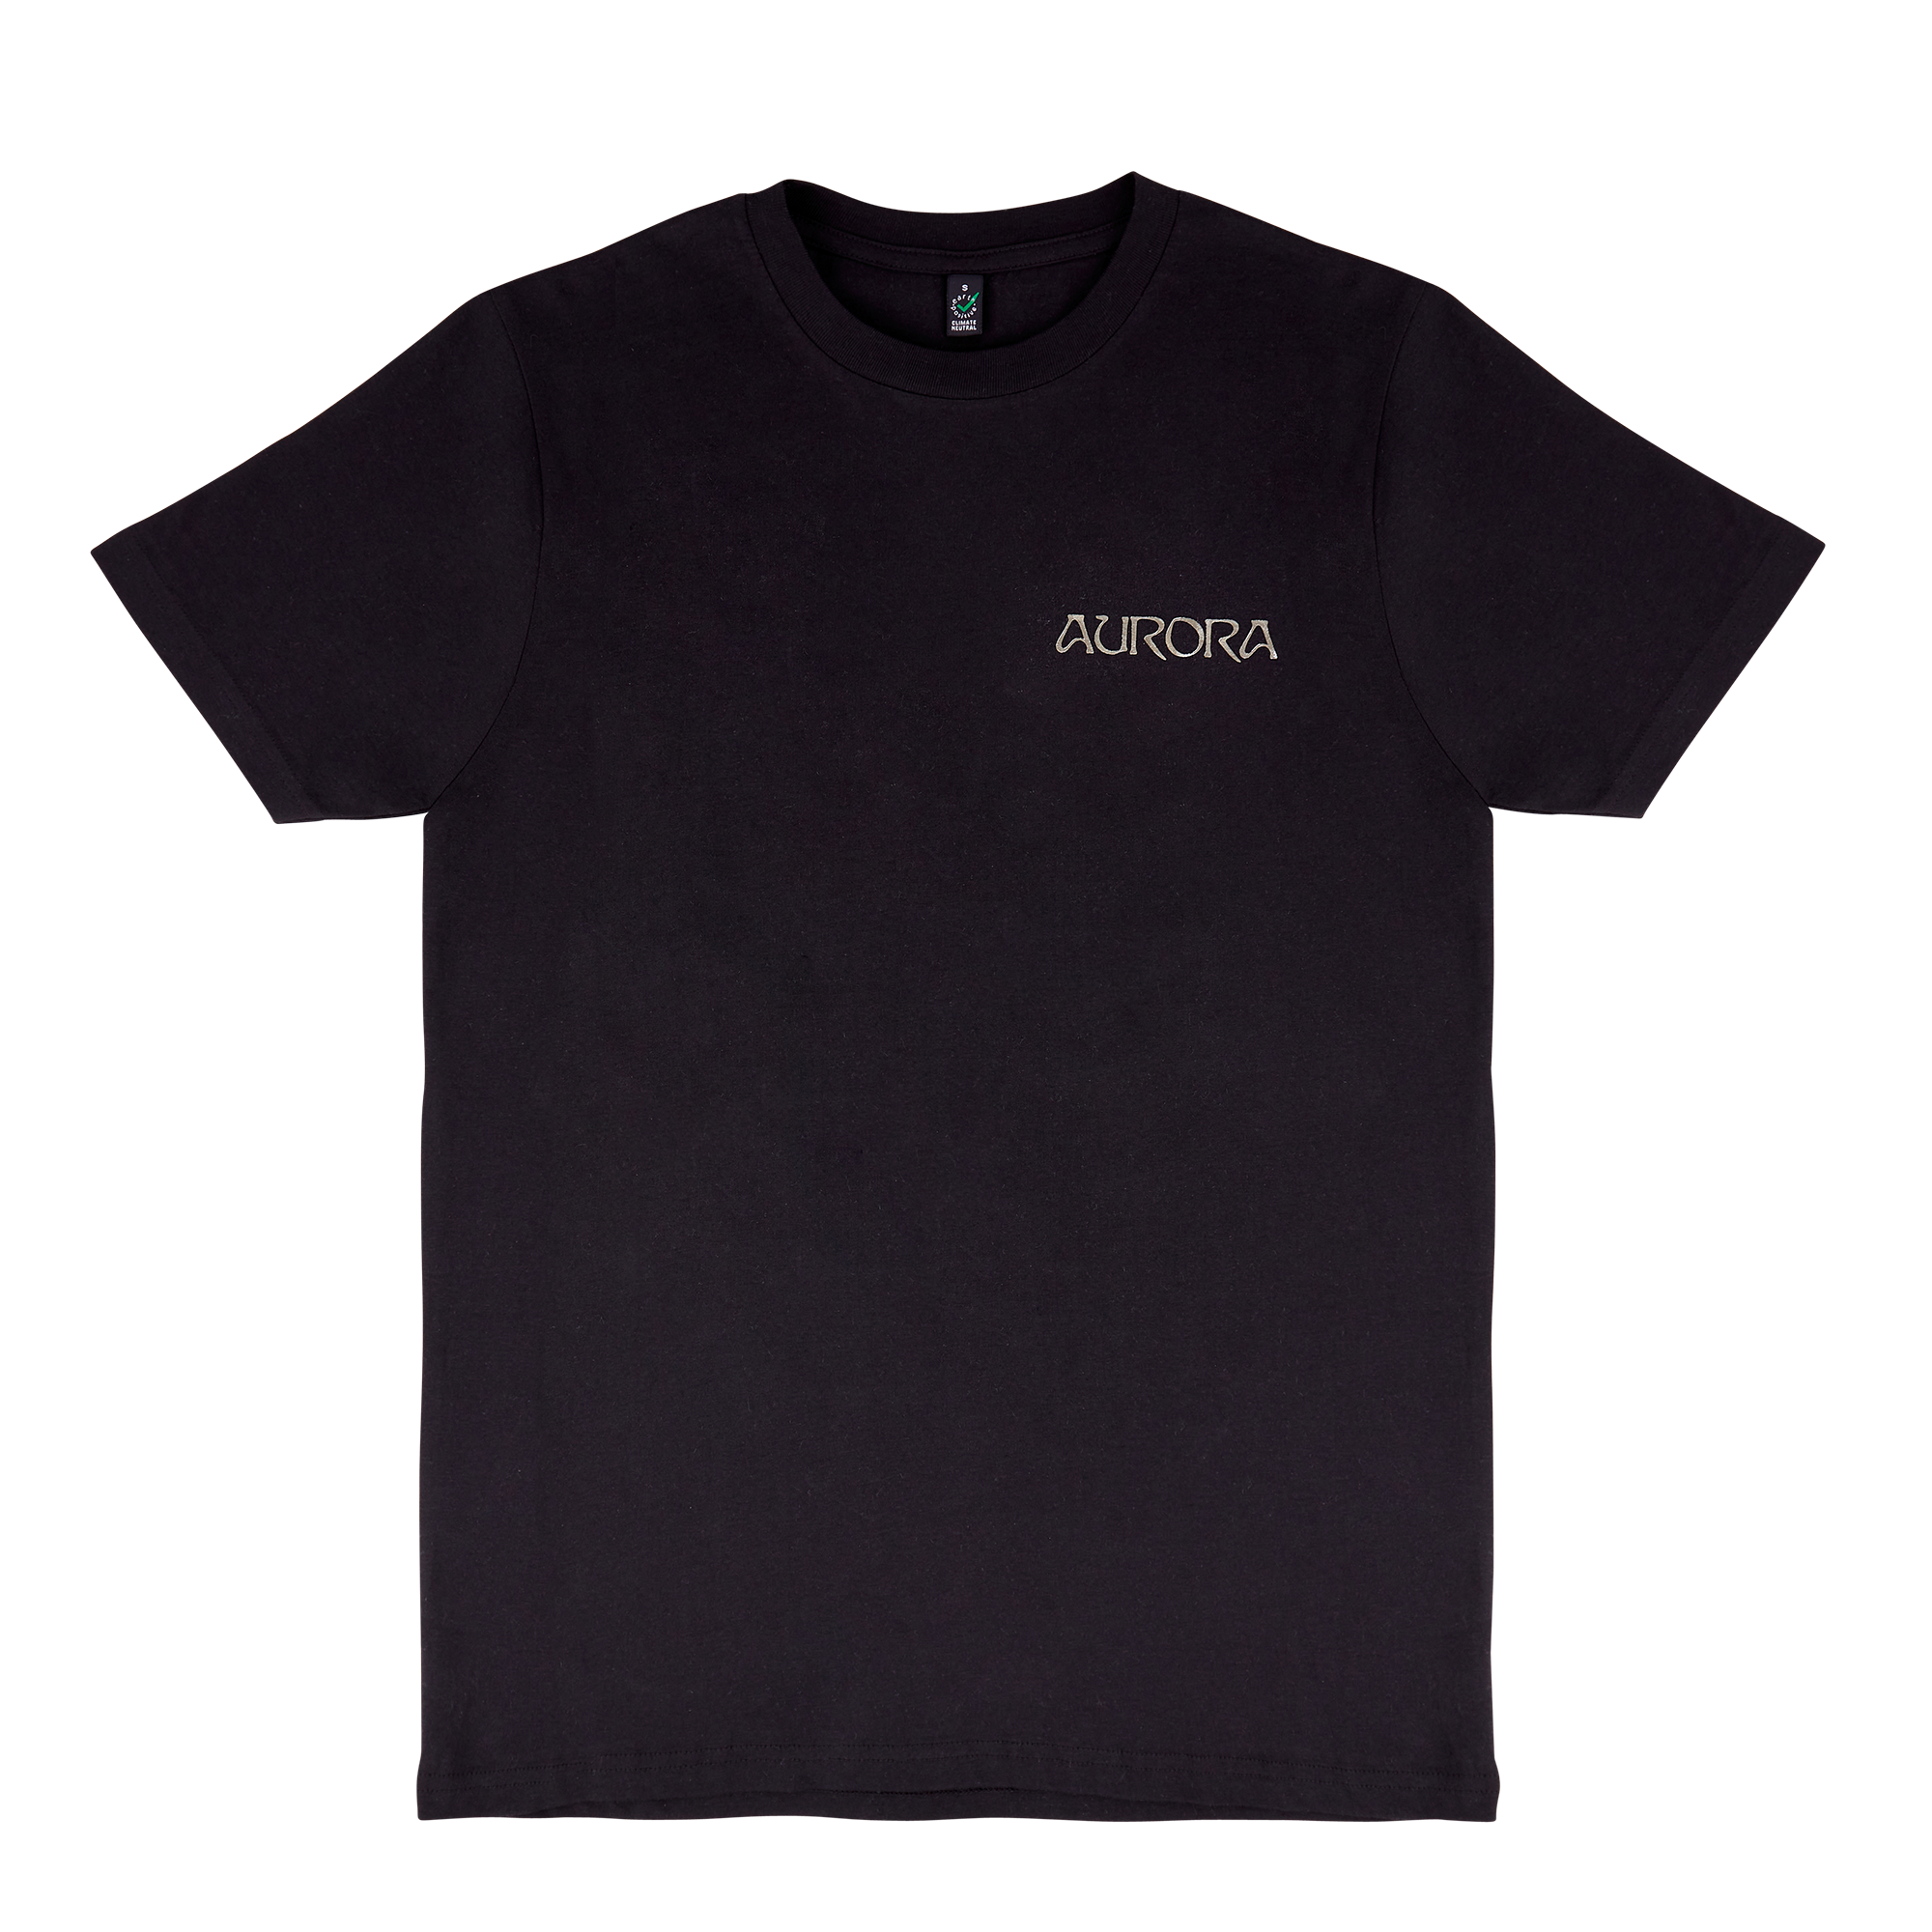 Aurora - The Gods we Can Touch Black T-shirt